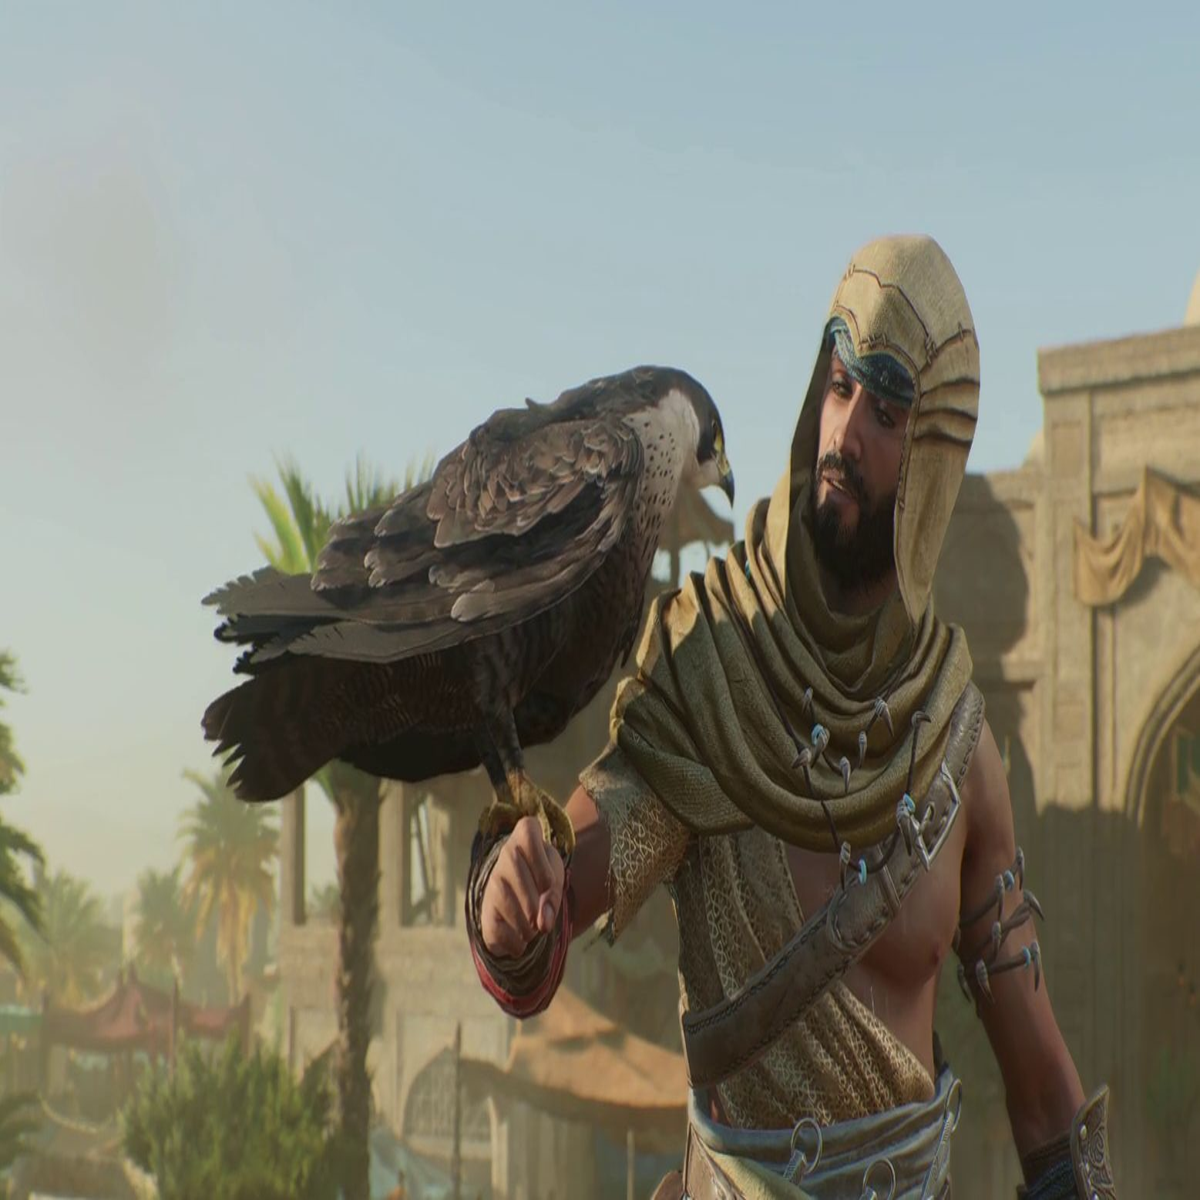 Assassin's Creed Mirage' Reviews Are In And Just Okay